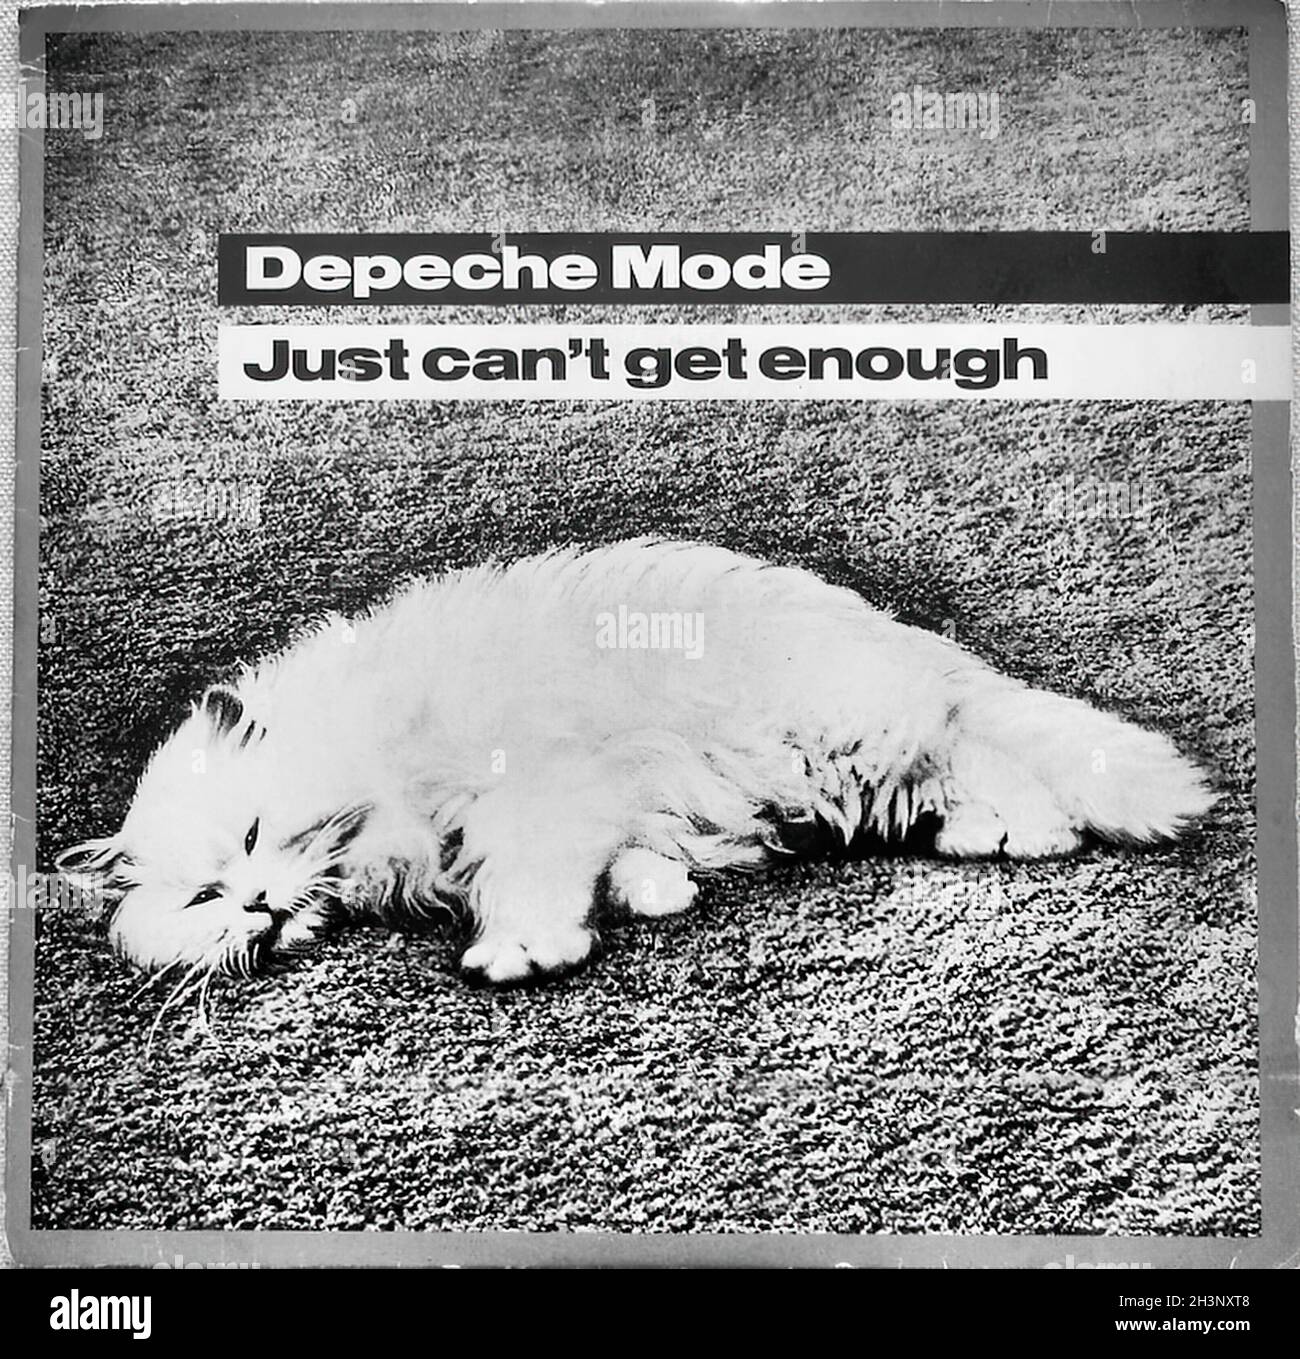 1981 Depeche Mode Just Can't Get Enough Vinyl Single 7 Inch 45 Rpm 1980s Uk  Import England Sleeve Record A 01 Stock Photo - Alamy